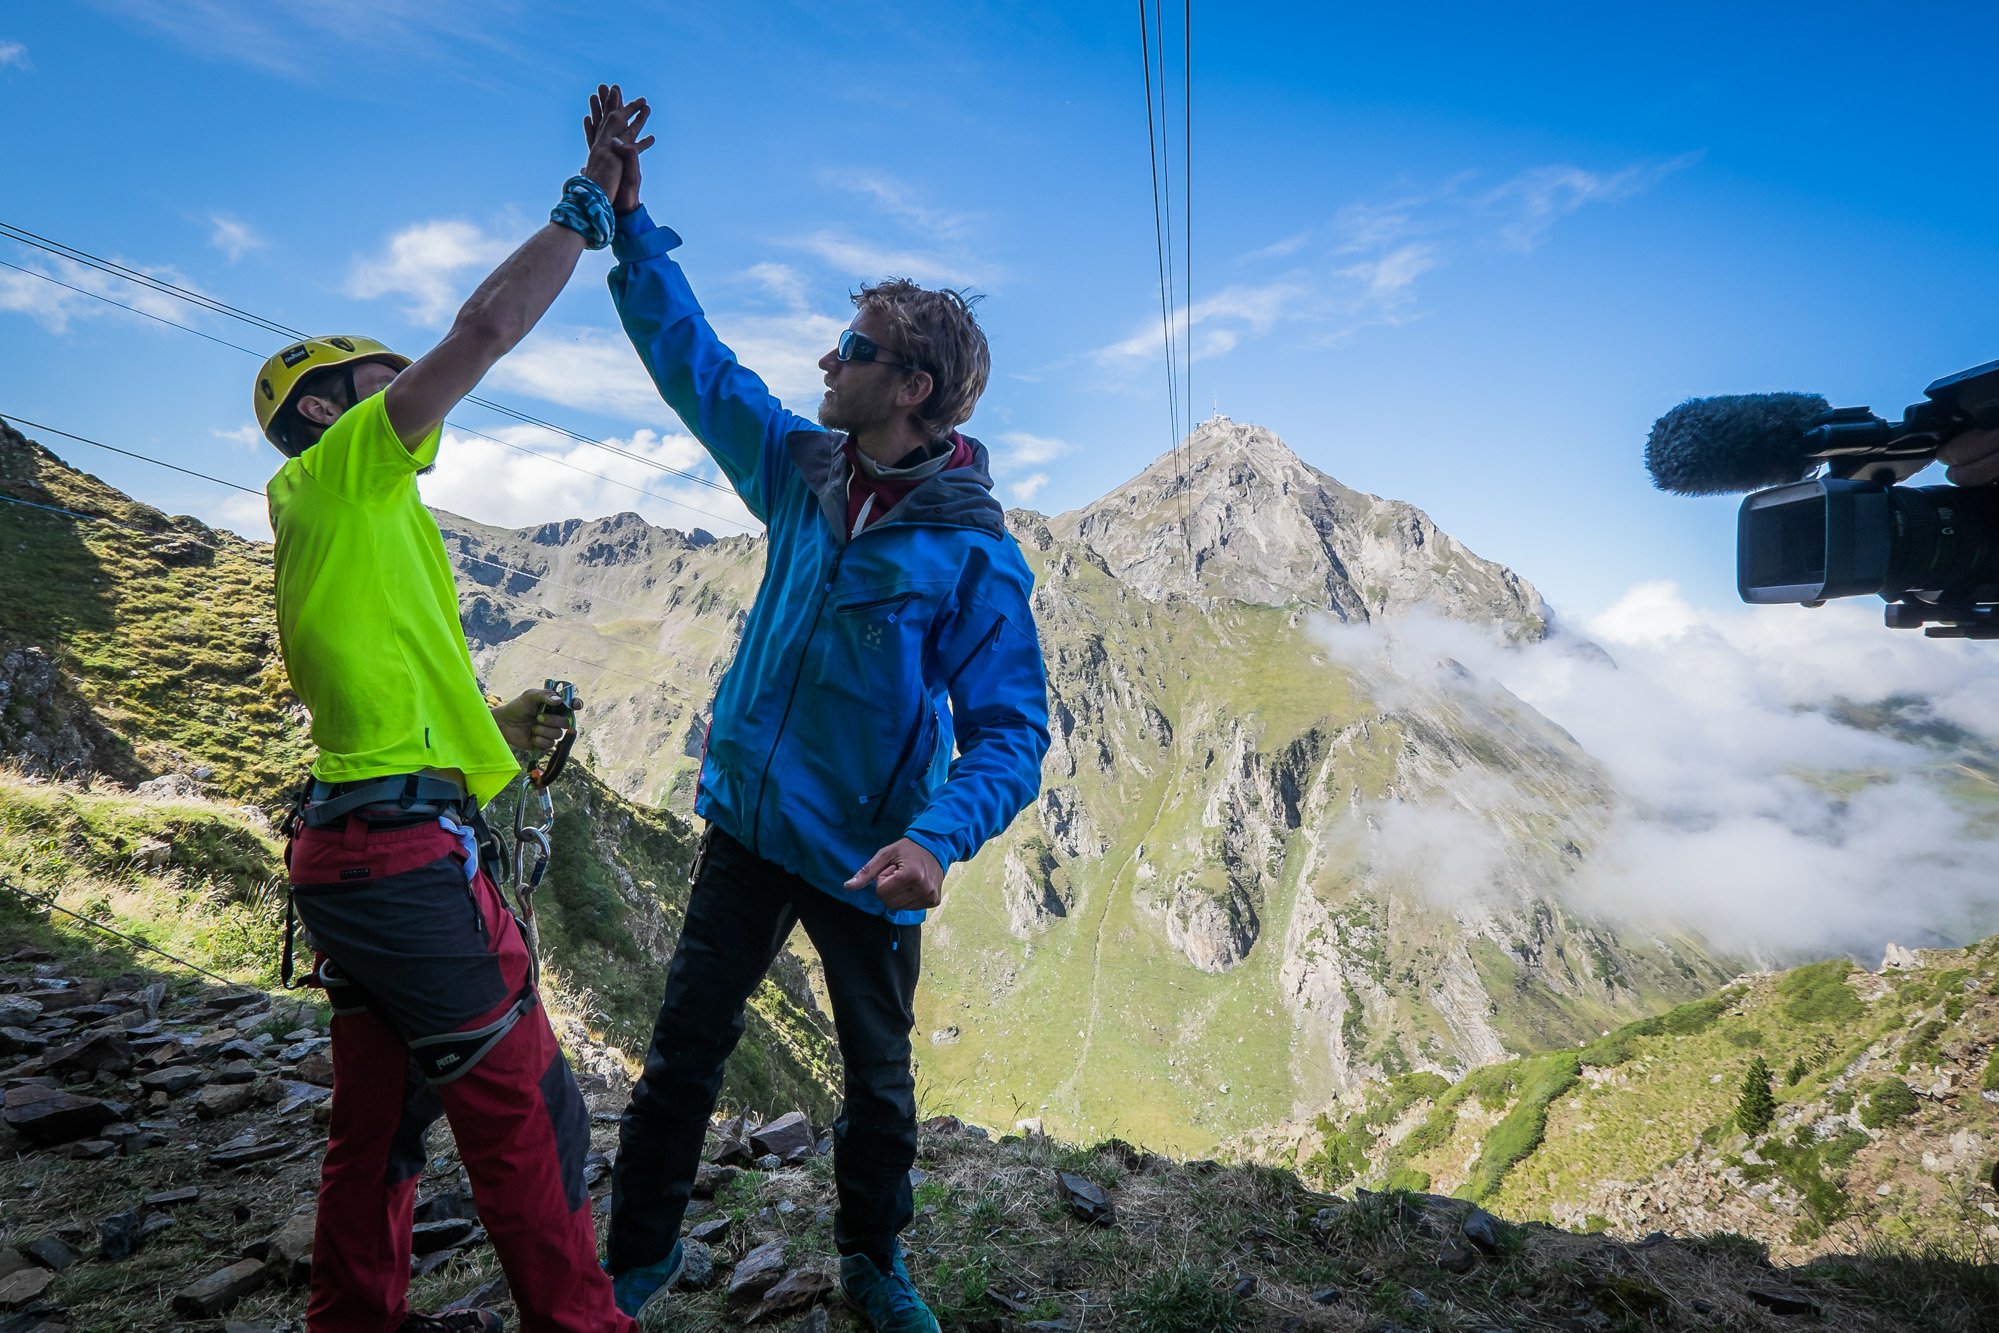 France - Extreme sports - Rope jump on the pic du midi with pyre